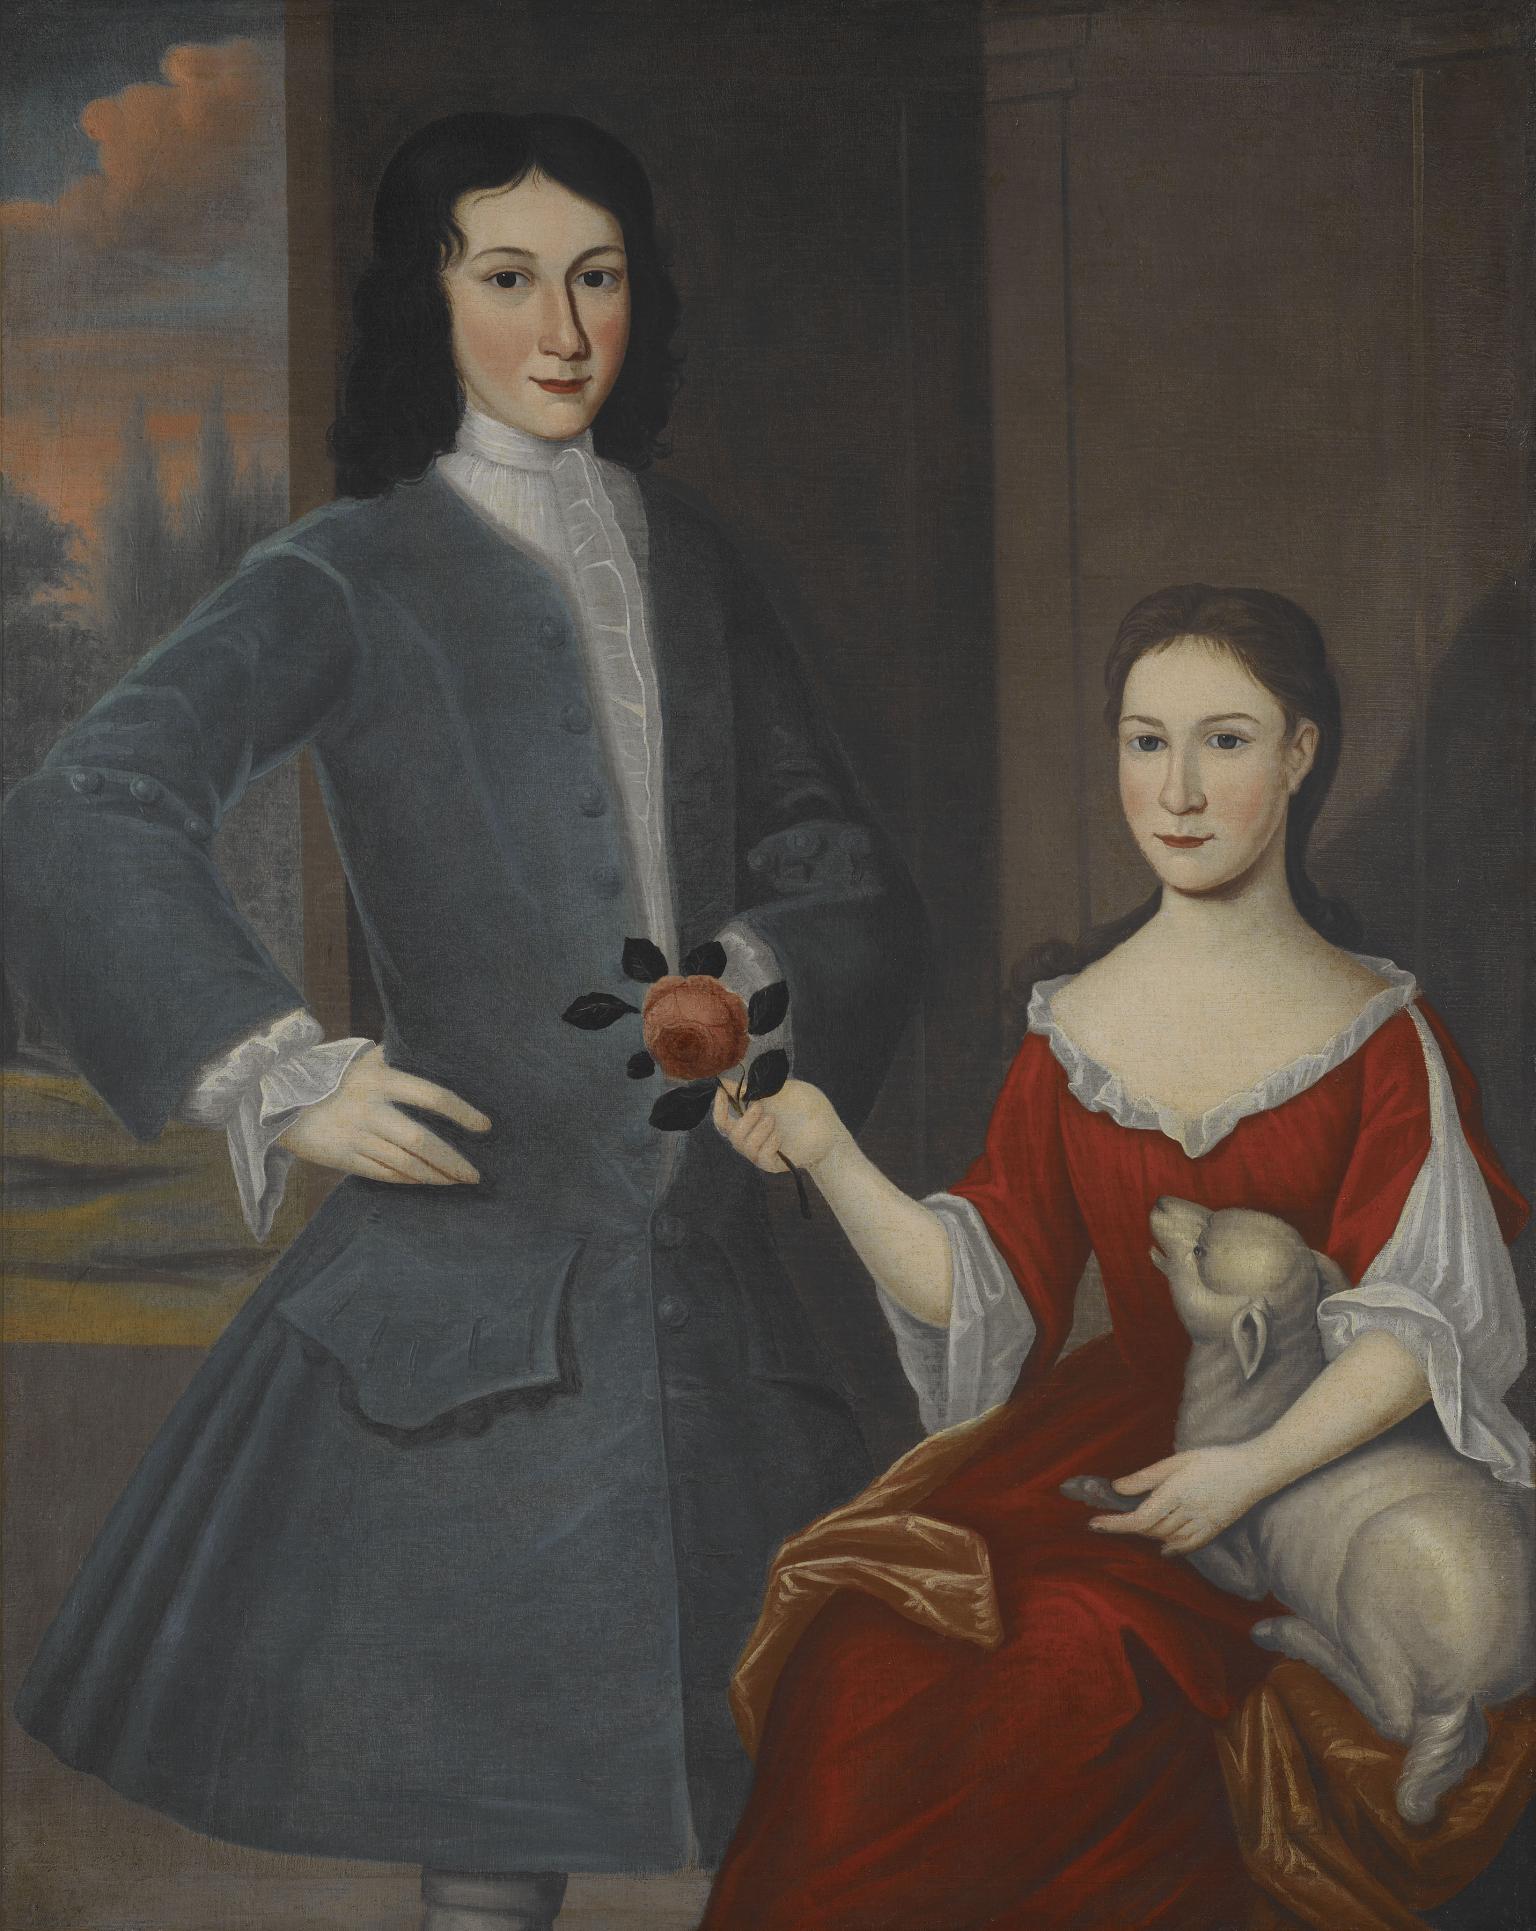 Portrait painting of boy standing next to girl sitting with rose in her hand and lamb in her lap.